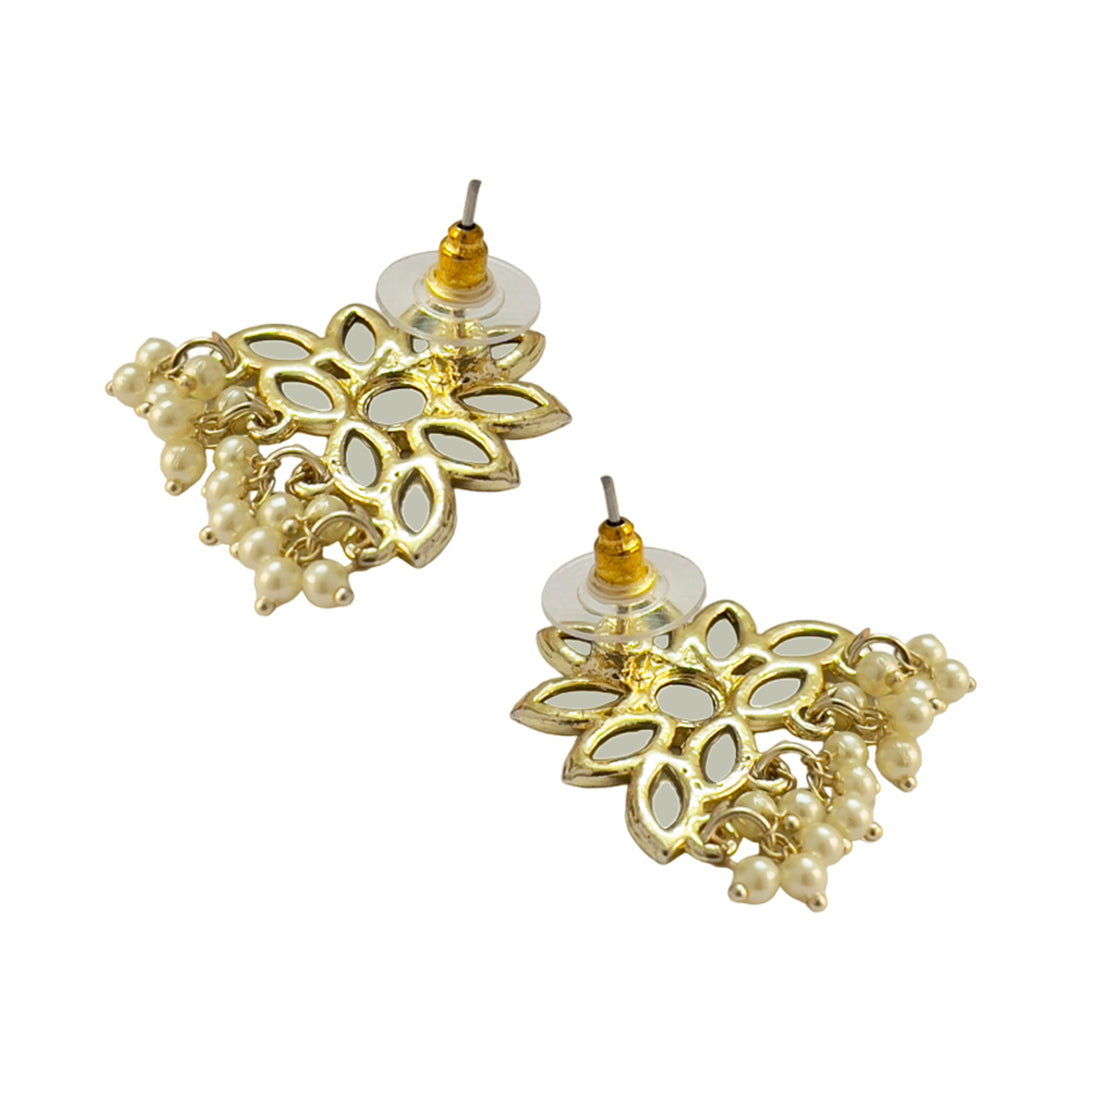 Half Flower Stud with Mirror Embellishments Gold-Toned Tiny Pearl Drop Earrings